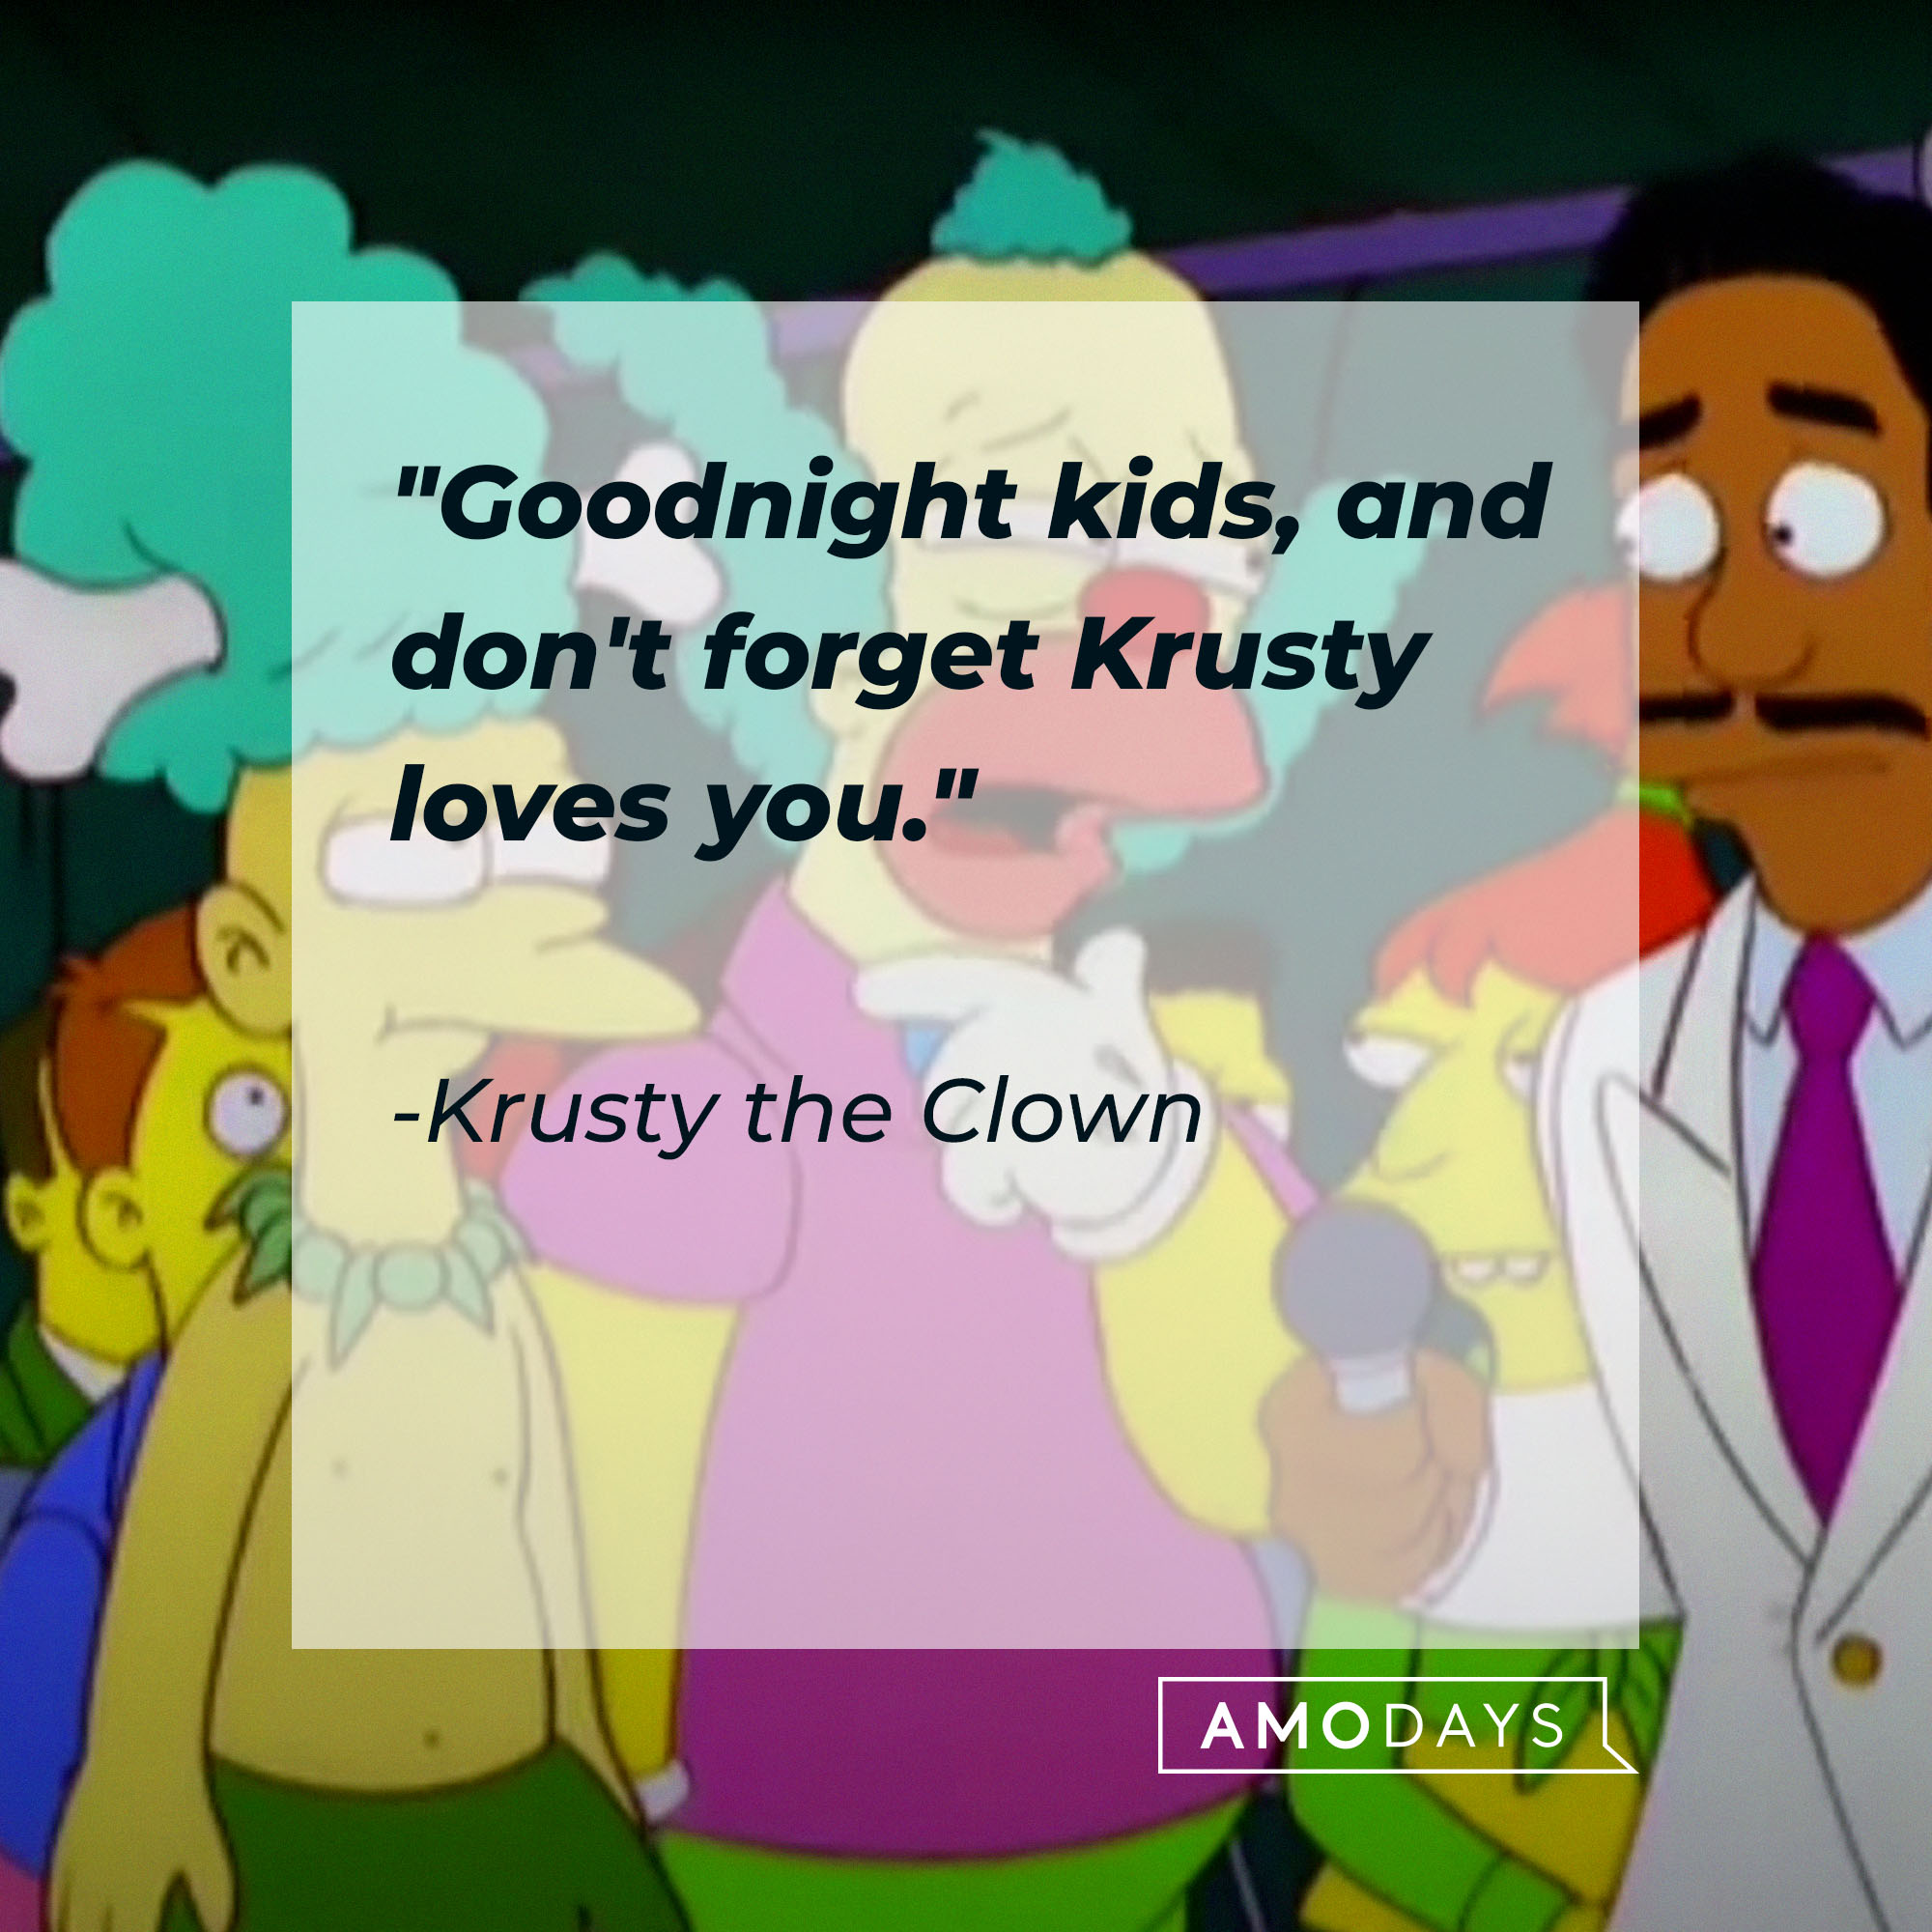 Krusty the Clown's quote: Goodnight kids, and don't forget Krusty loves you" | Source: Facebook.com/TheSimpsons